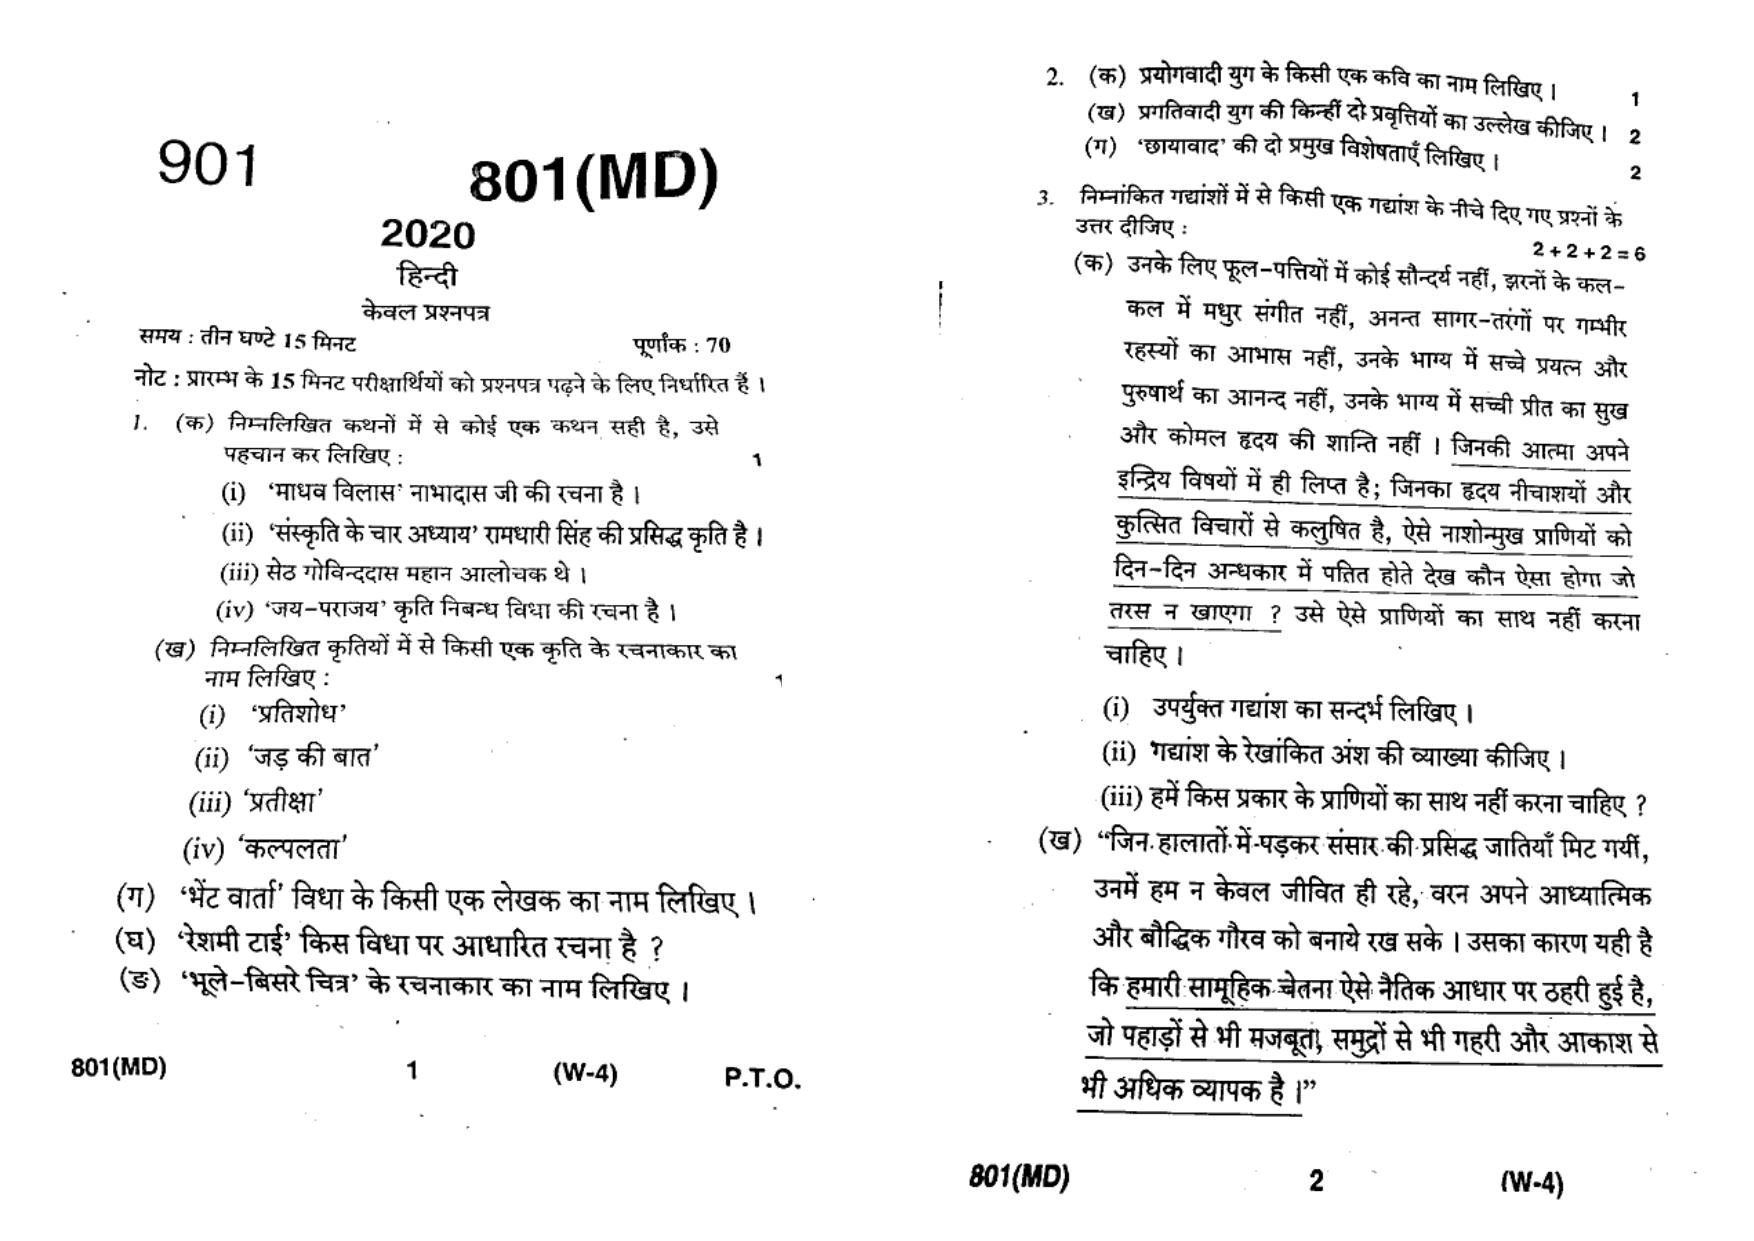 UP Board Previous Year Question Paper Class 10 Hindi (801 MD) – 2020 - Page 1